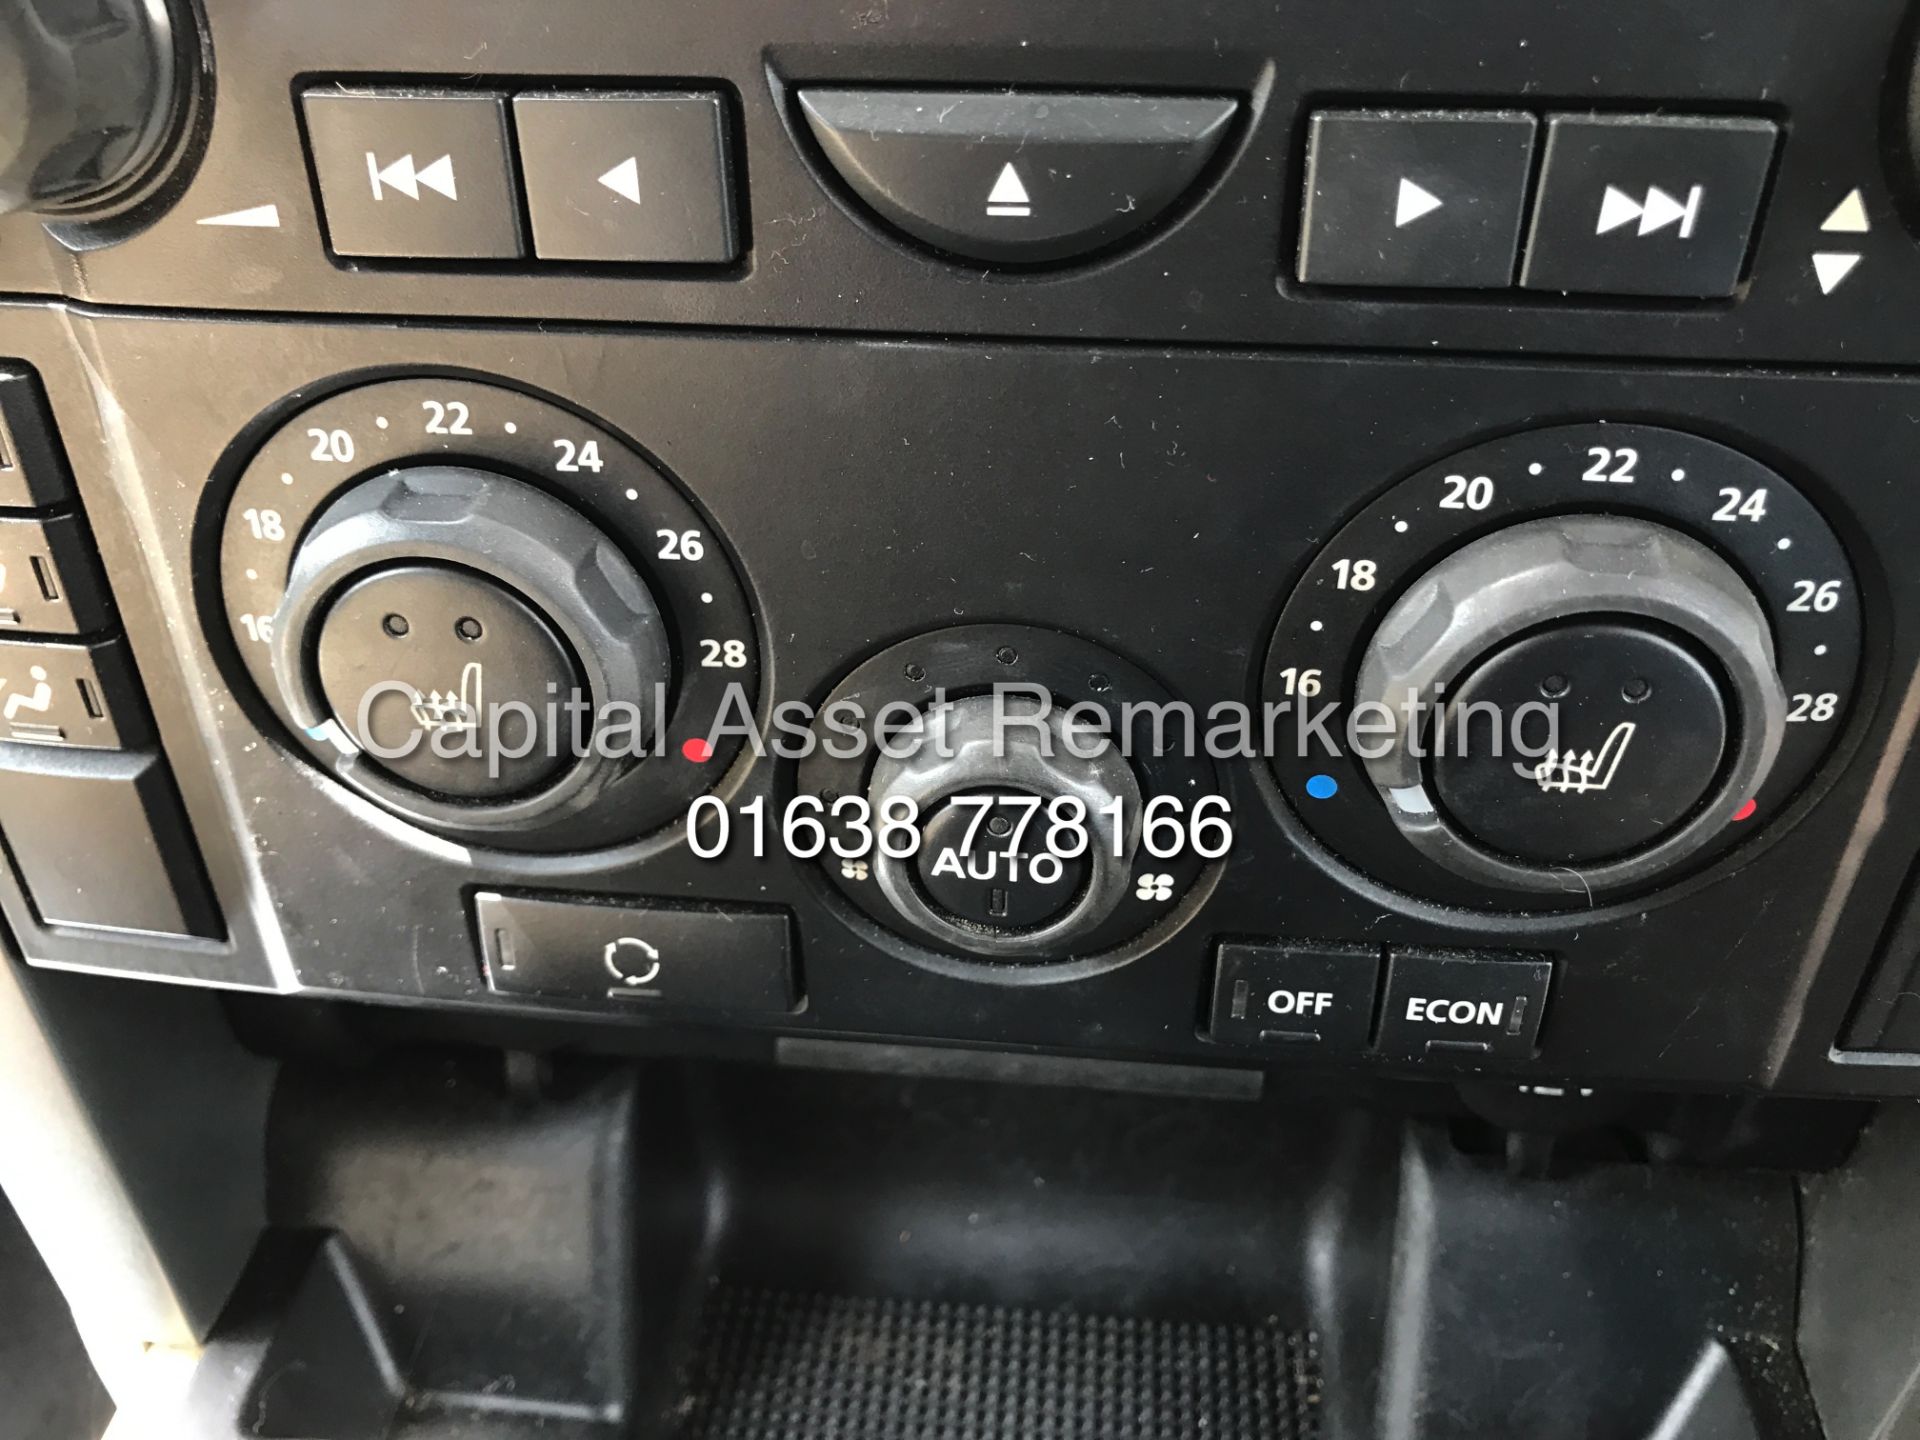 (ON SALE) LANDROVER DISCOVERY 3 "TDV6 "HSE" AUTOMATIC (08 REG) BLACK - FSH - LEATHER - SAT NAV - - Image 15 of 16